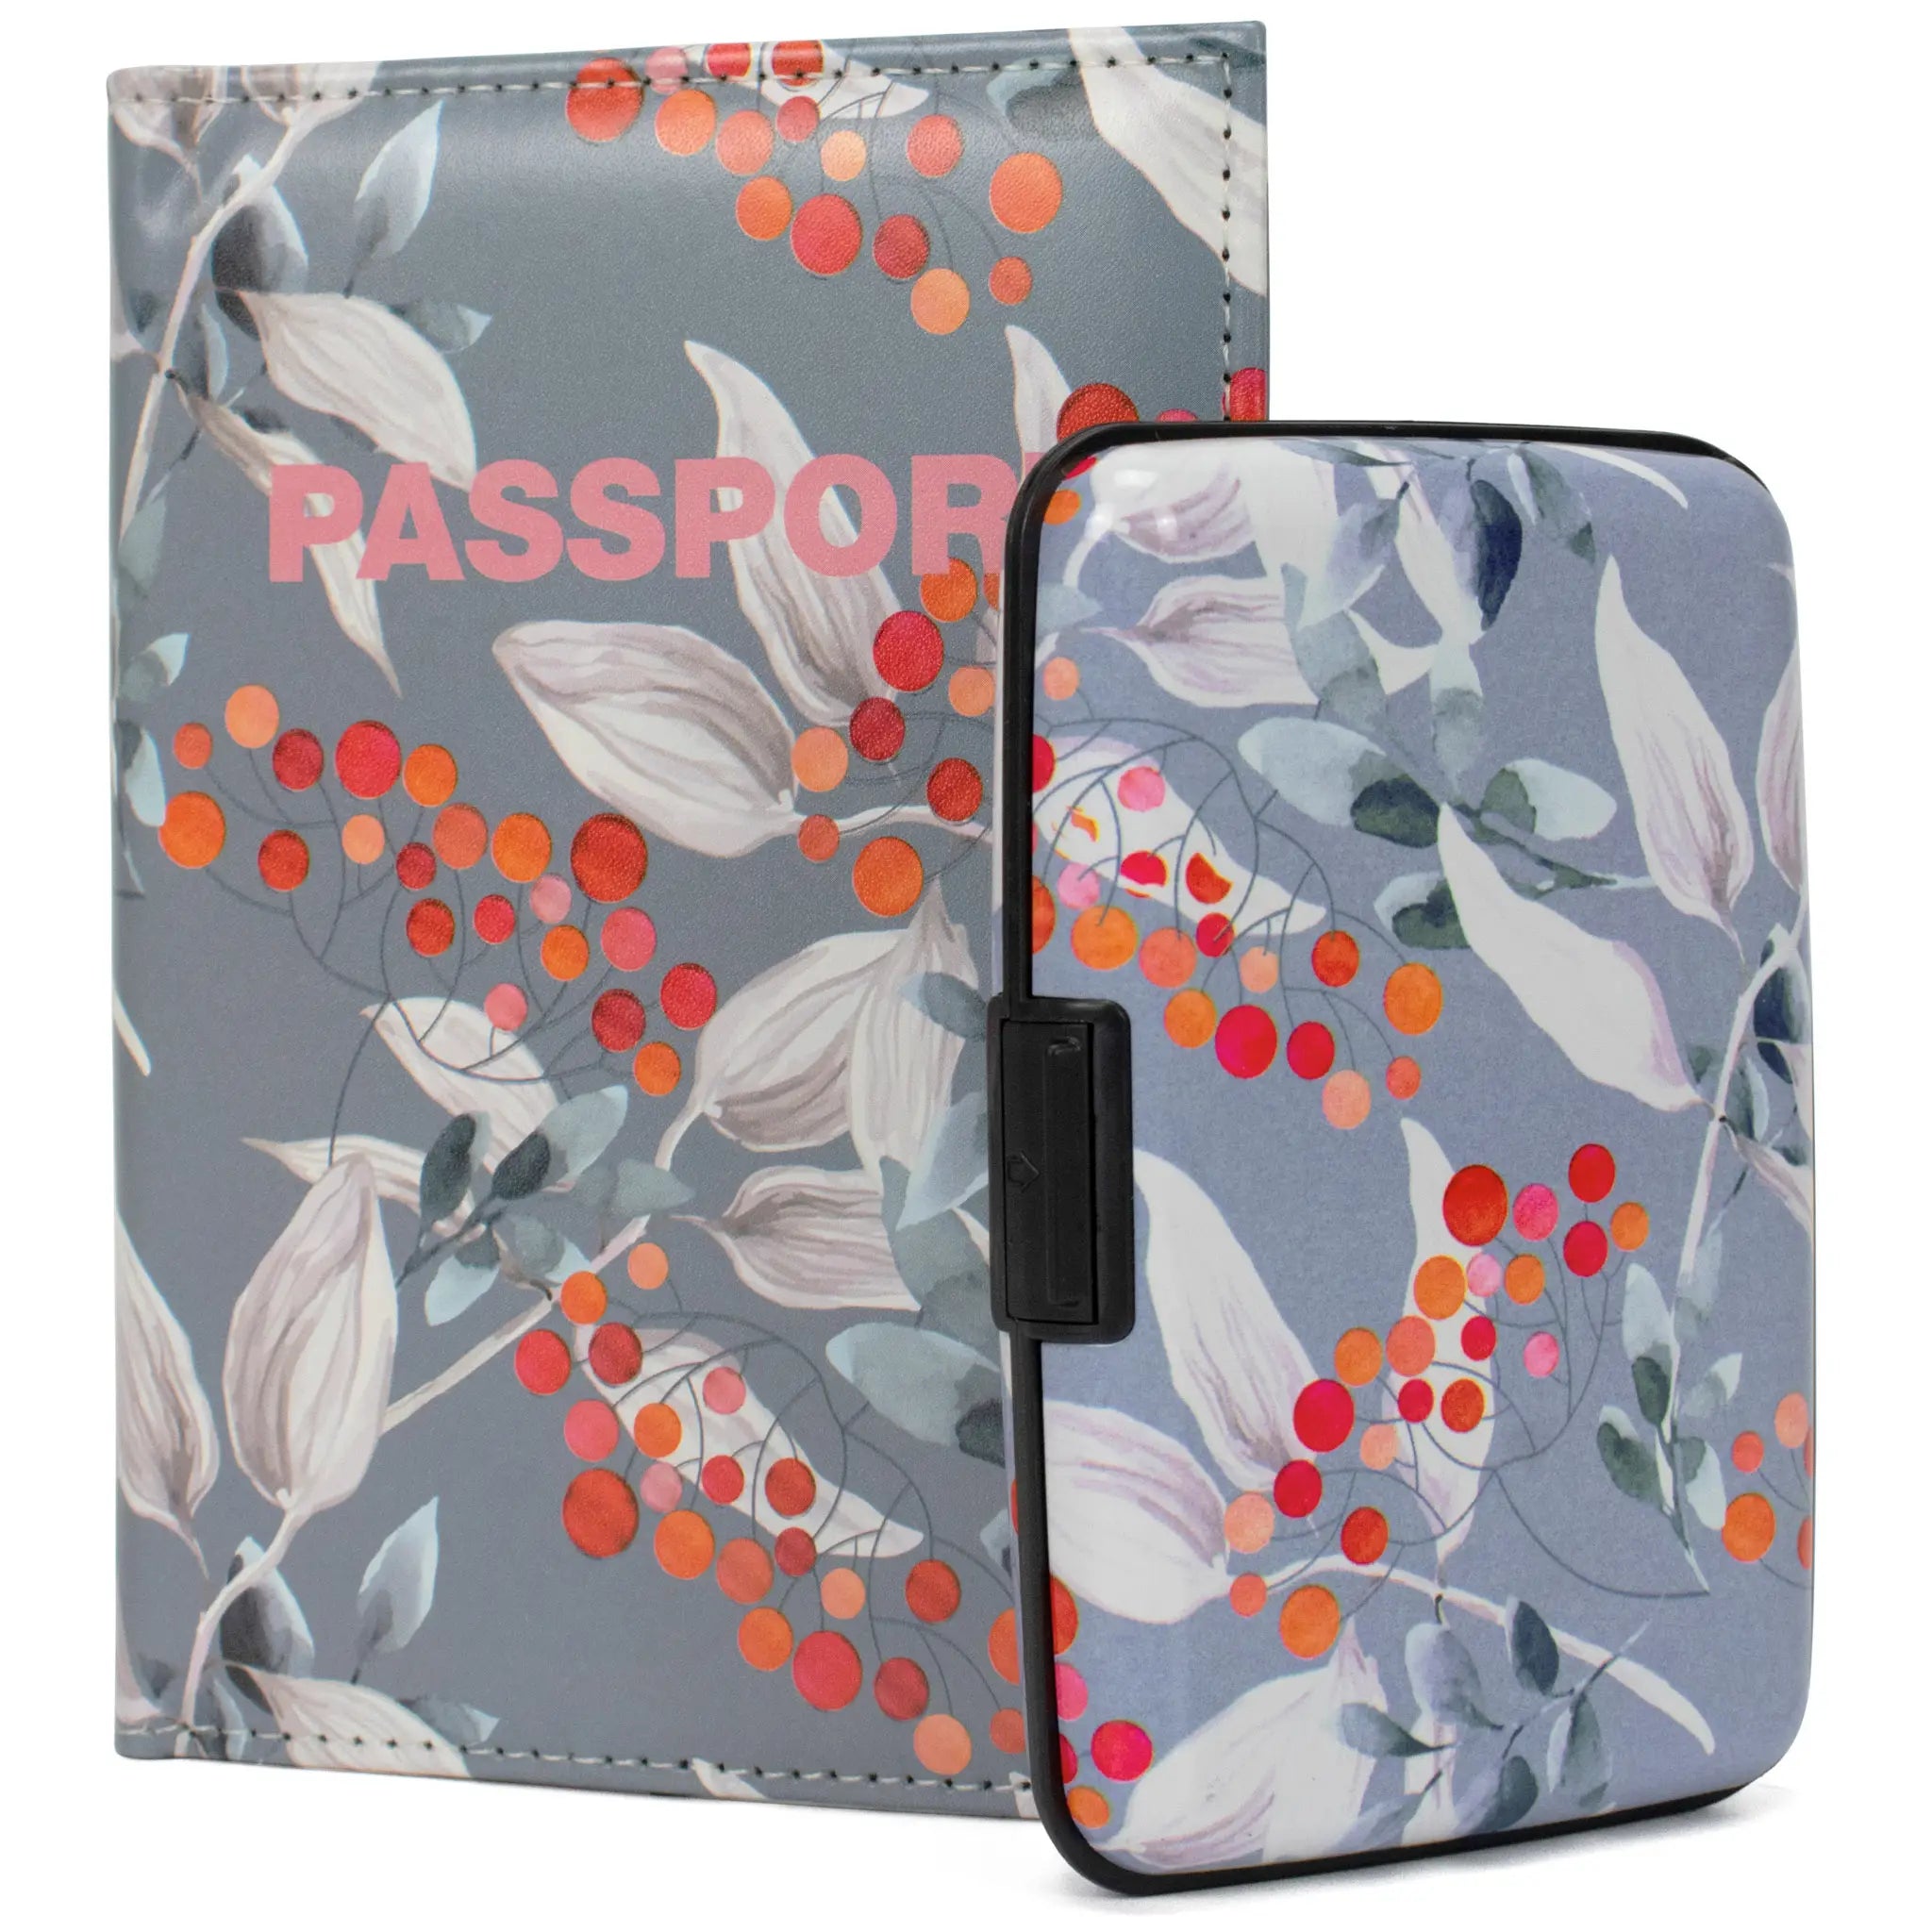 RFID Protected Passport Cover Wallet Set